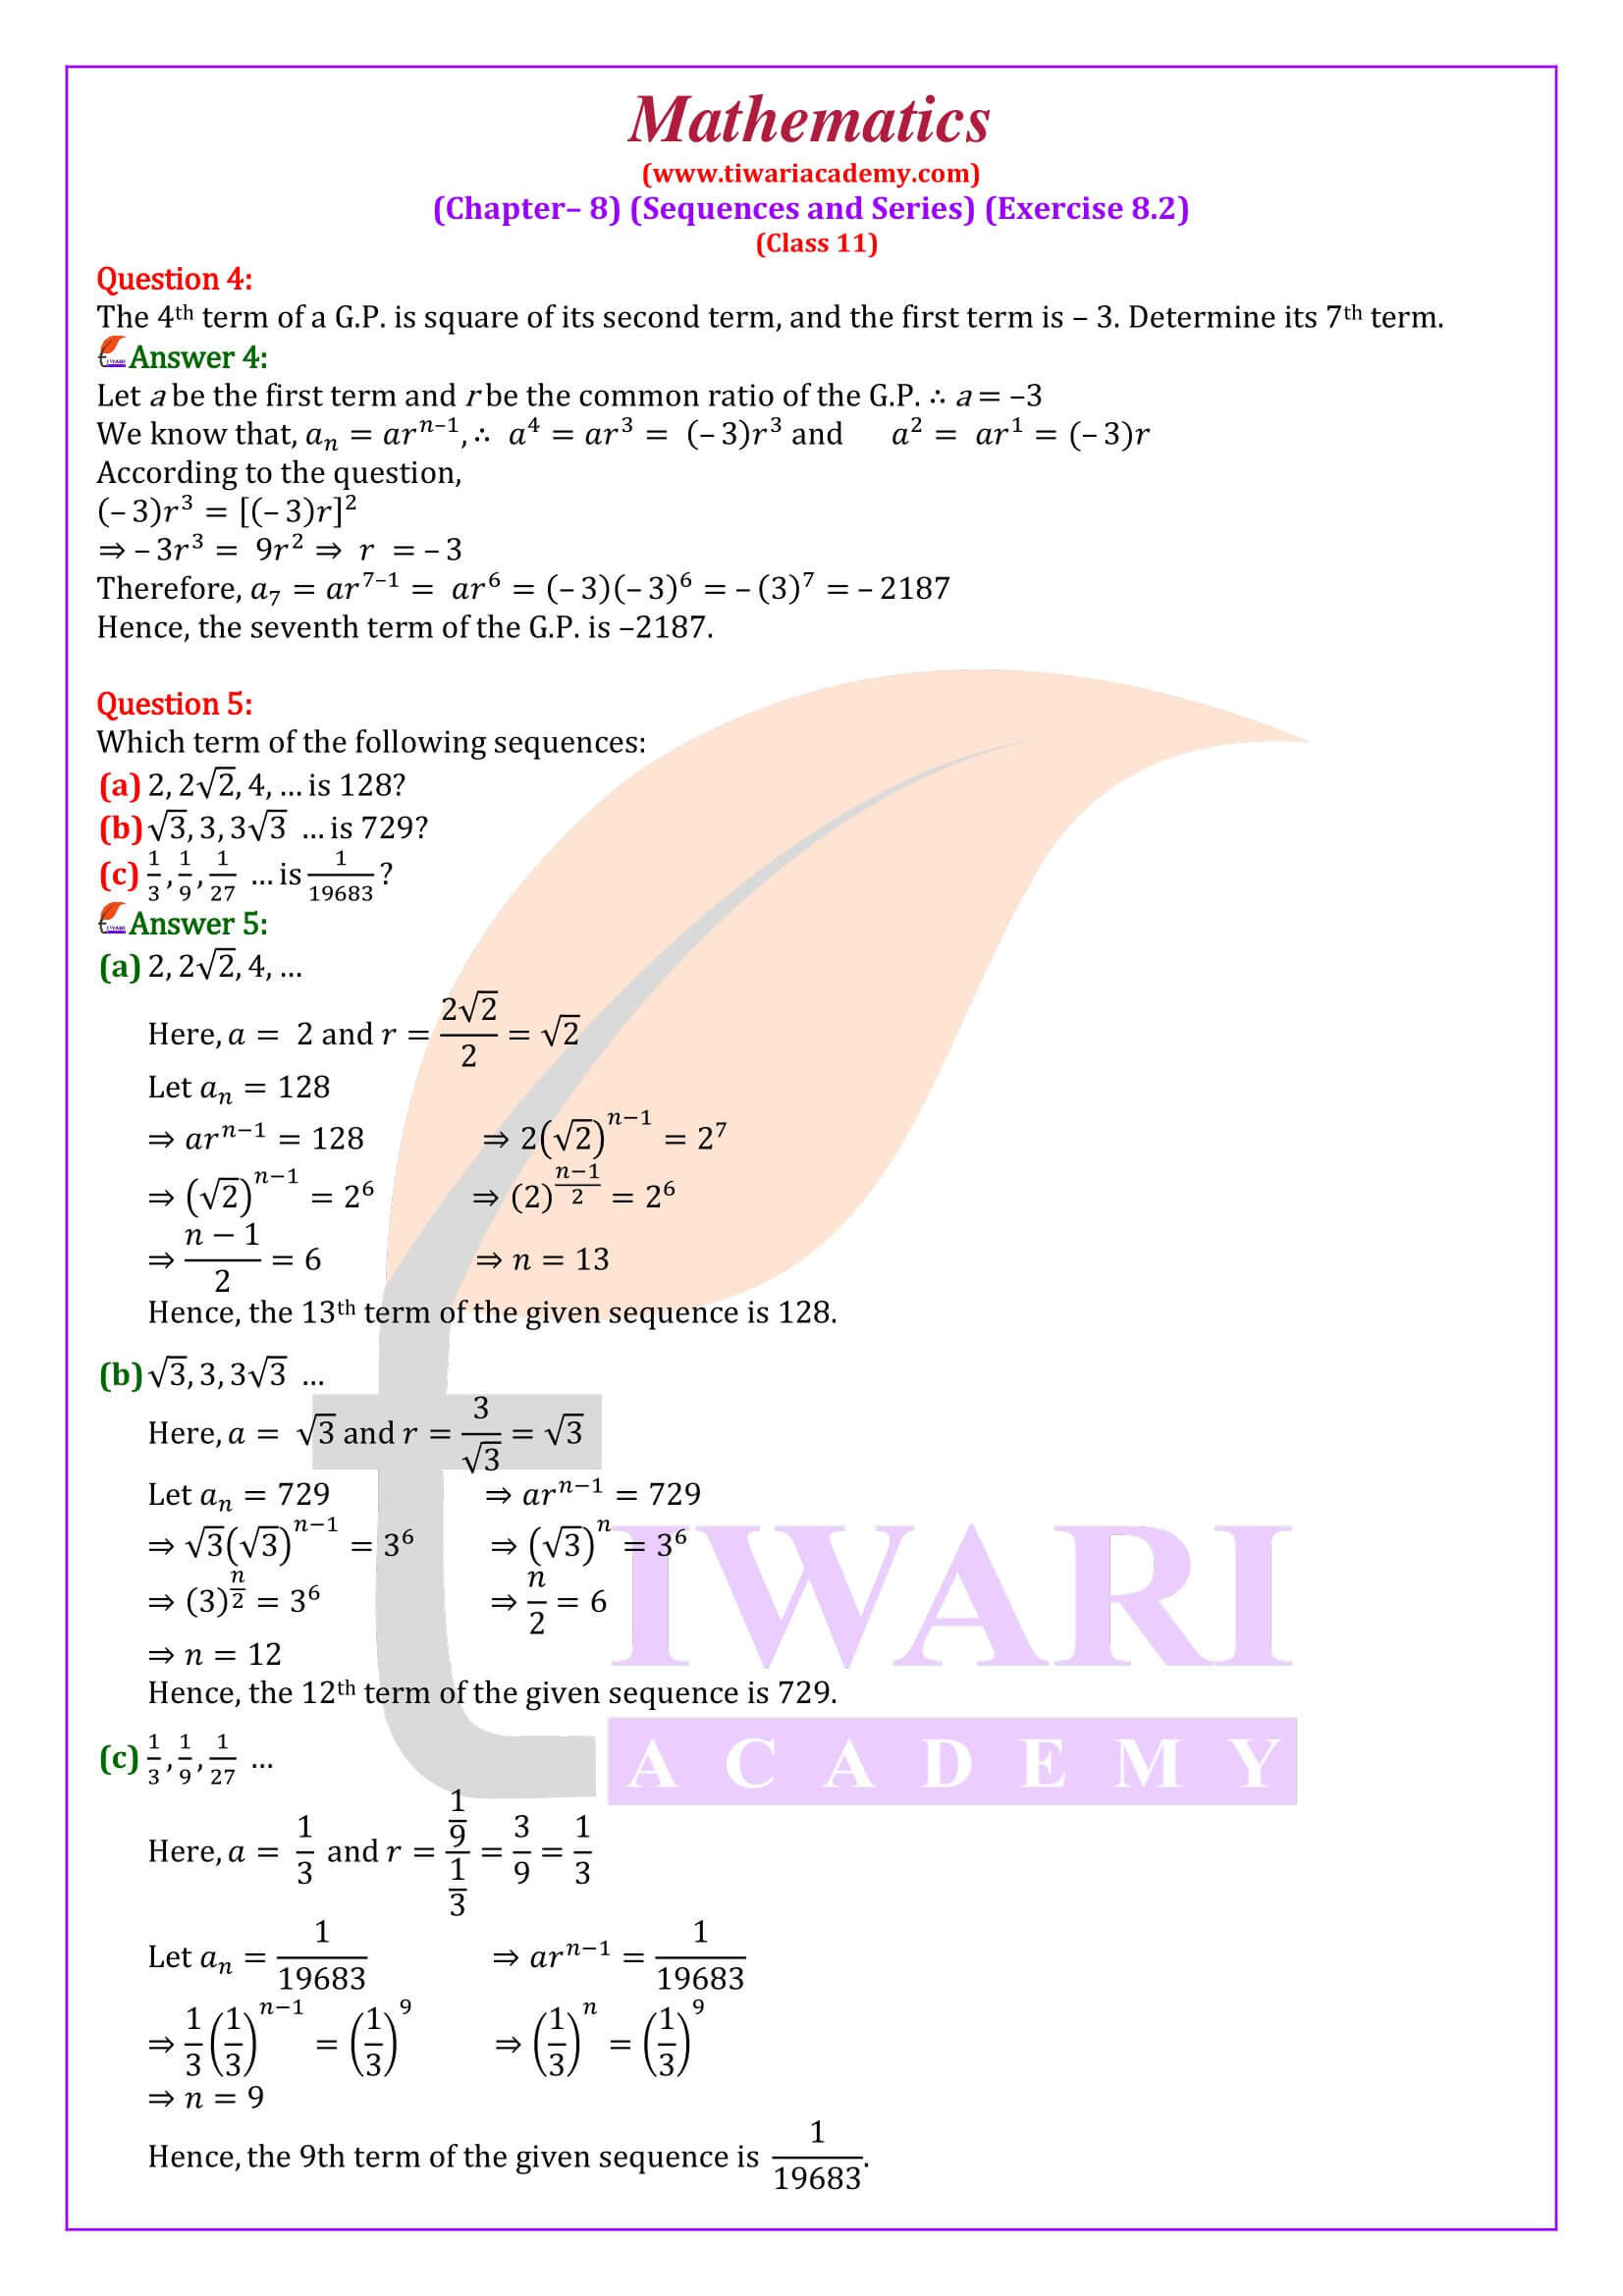 NCERT Solutions for Class 11 Maths Chapter 8 Exercise 8.2 revised and updated